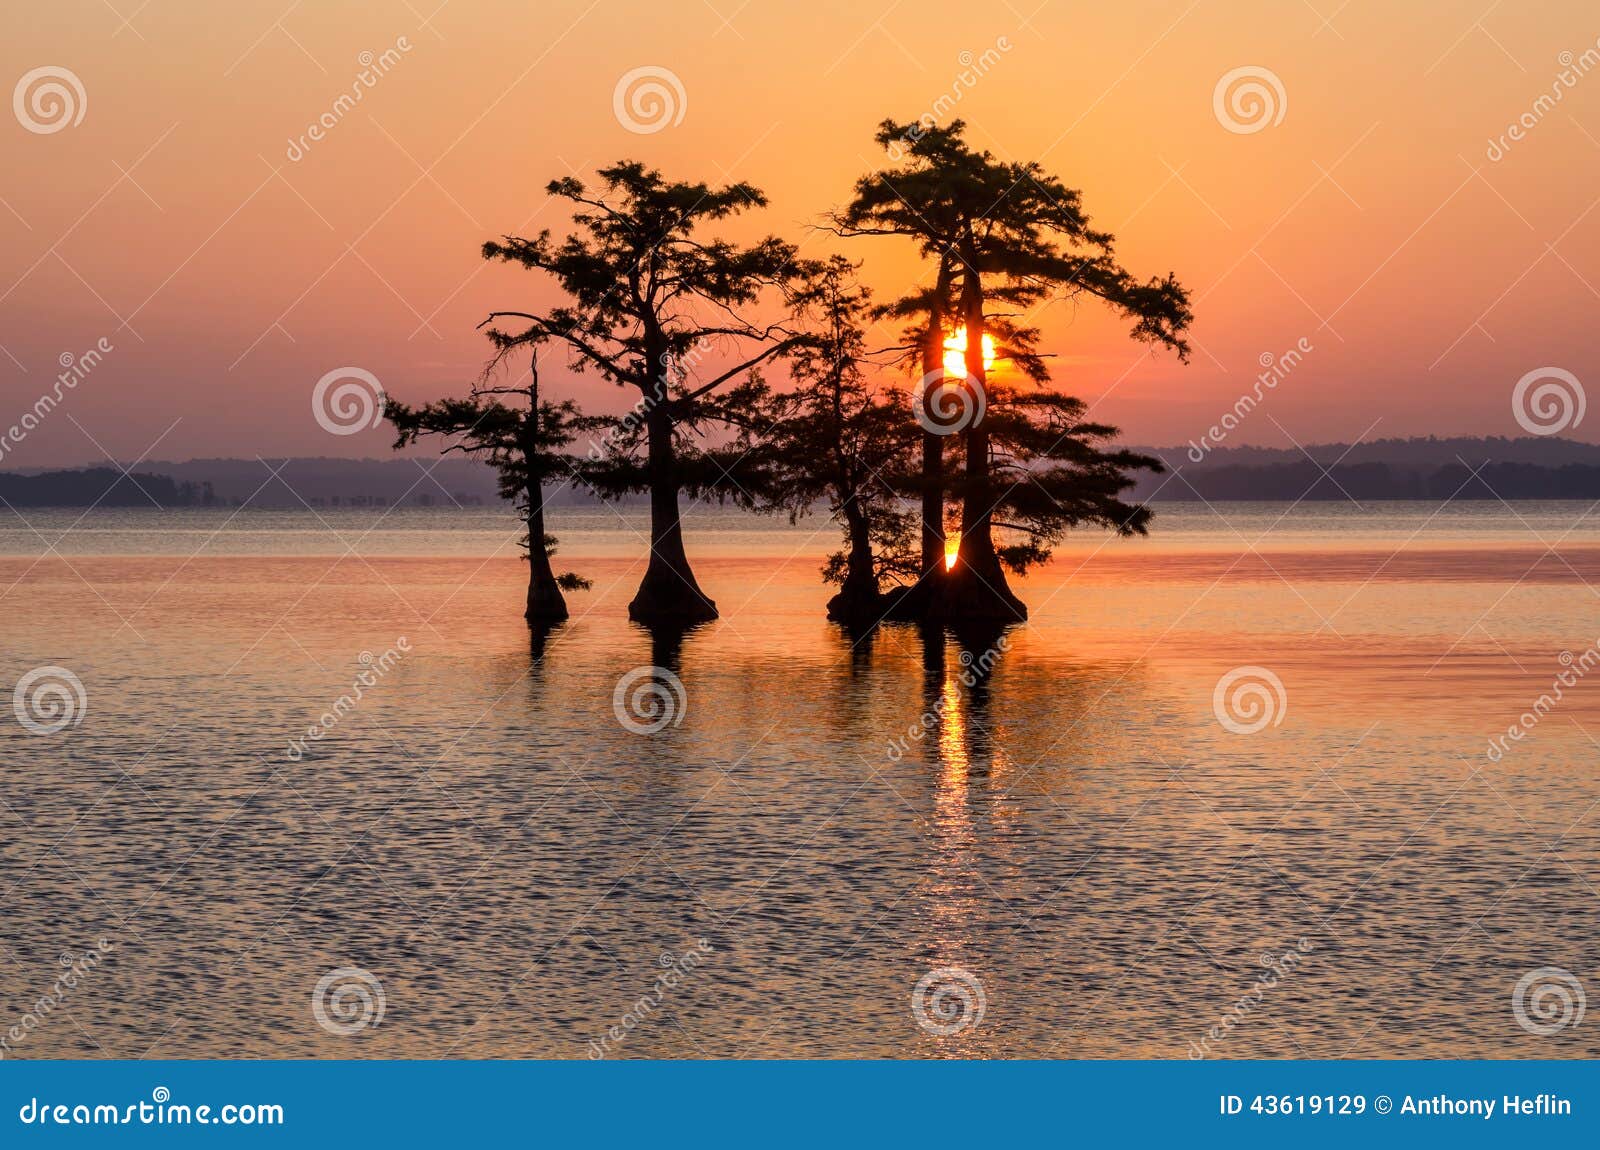 bald cypress trees, reelfoot lake, tennessee state park